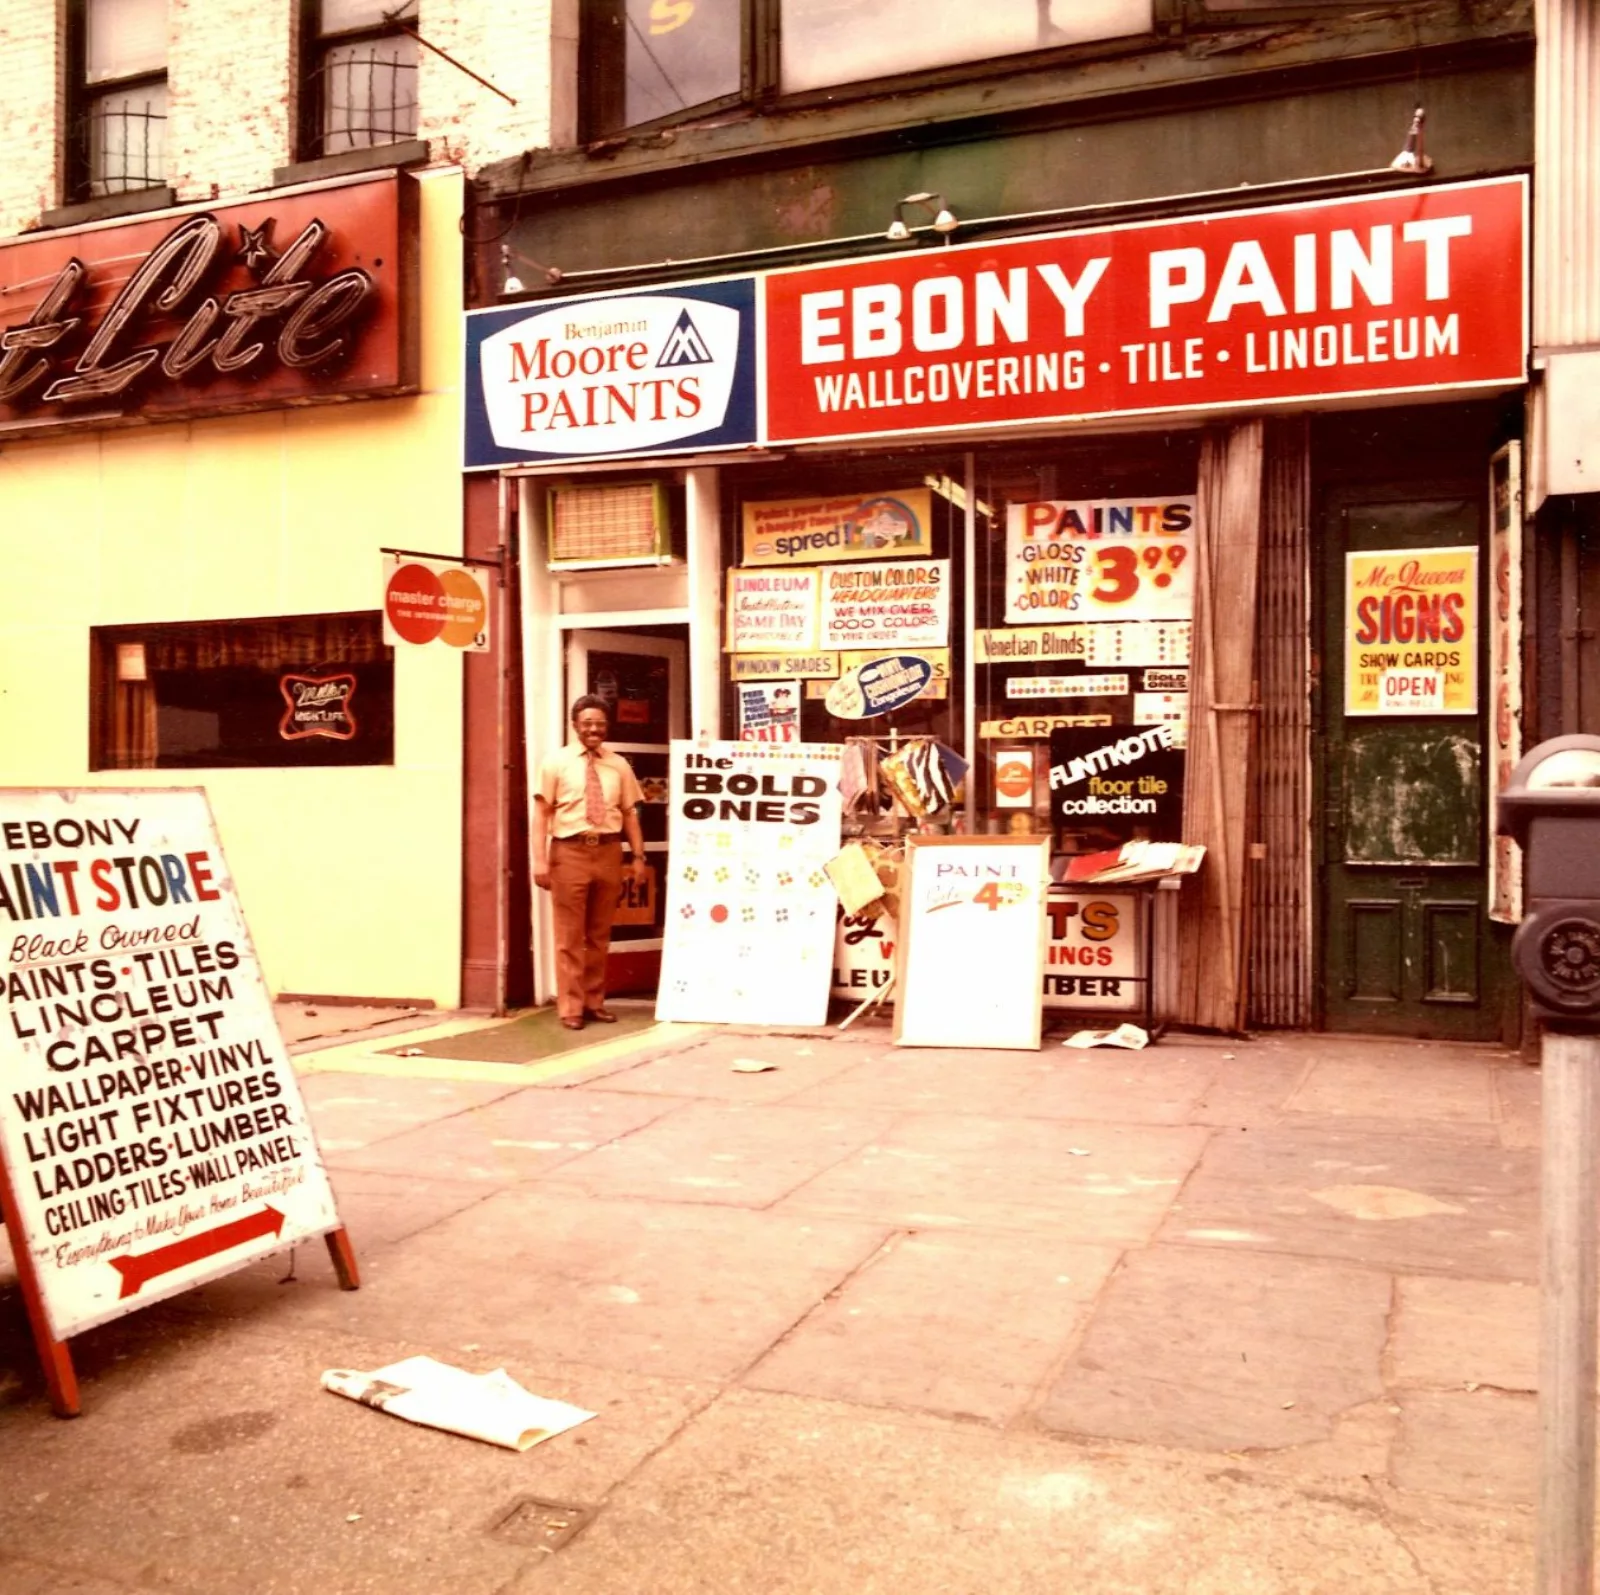 Above the Ebony Paint storefront is a red sign with white letters: Ebony Paint: Wallcovering, Tile, Linoleum